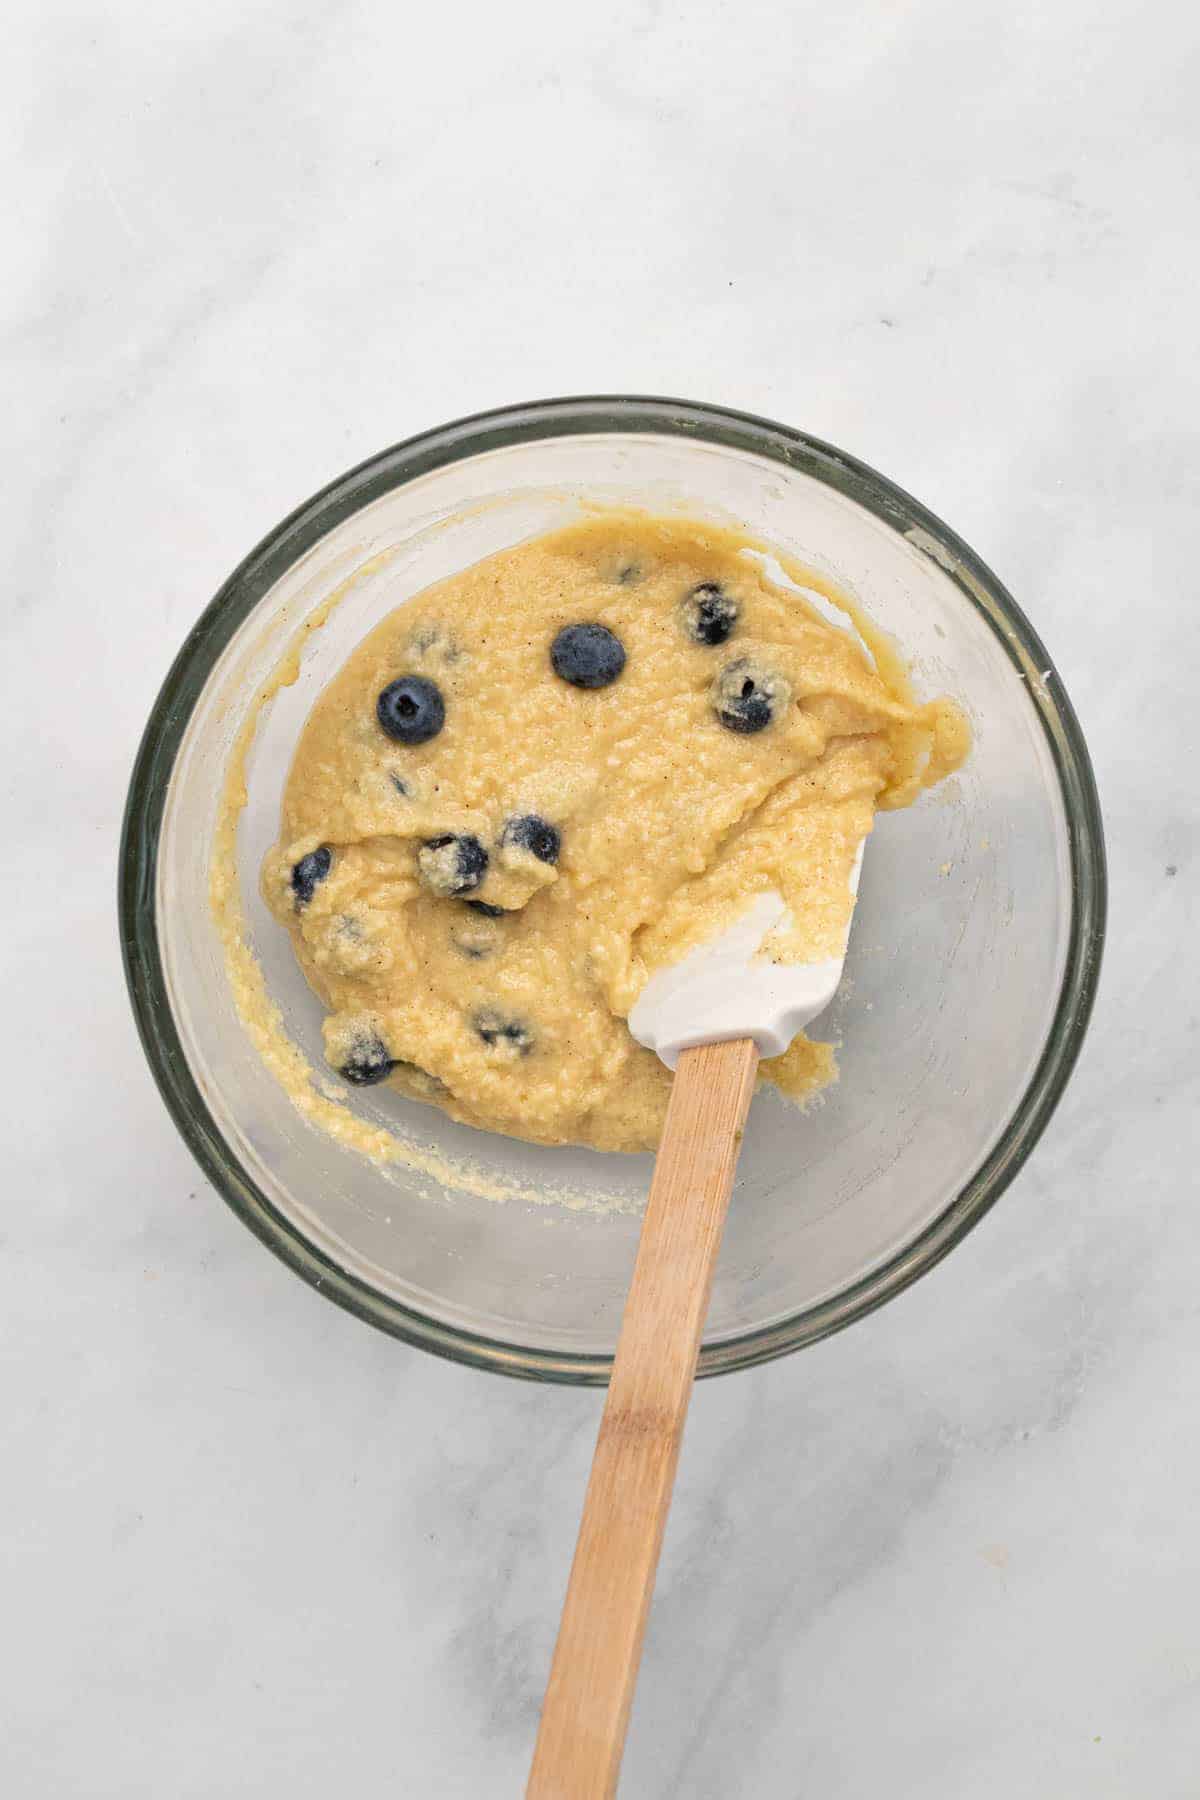 Muffin batter in a glass mixing bowl with blueberries folded in and a rubber spatula